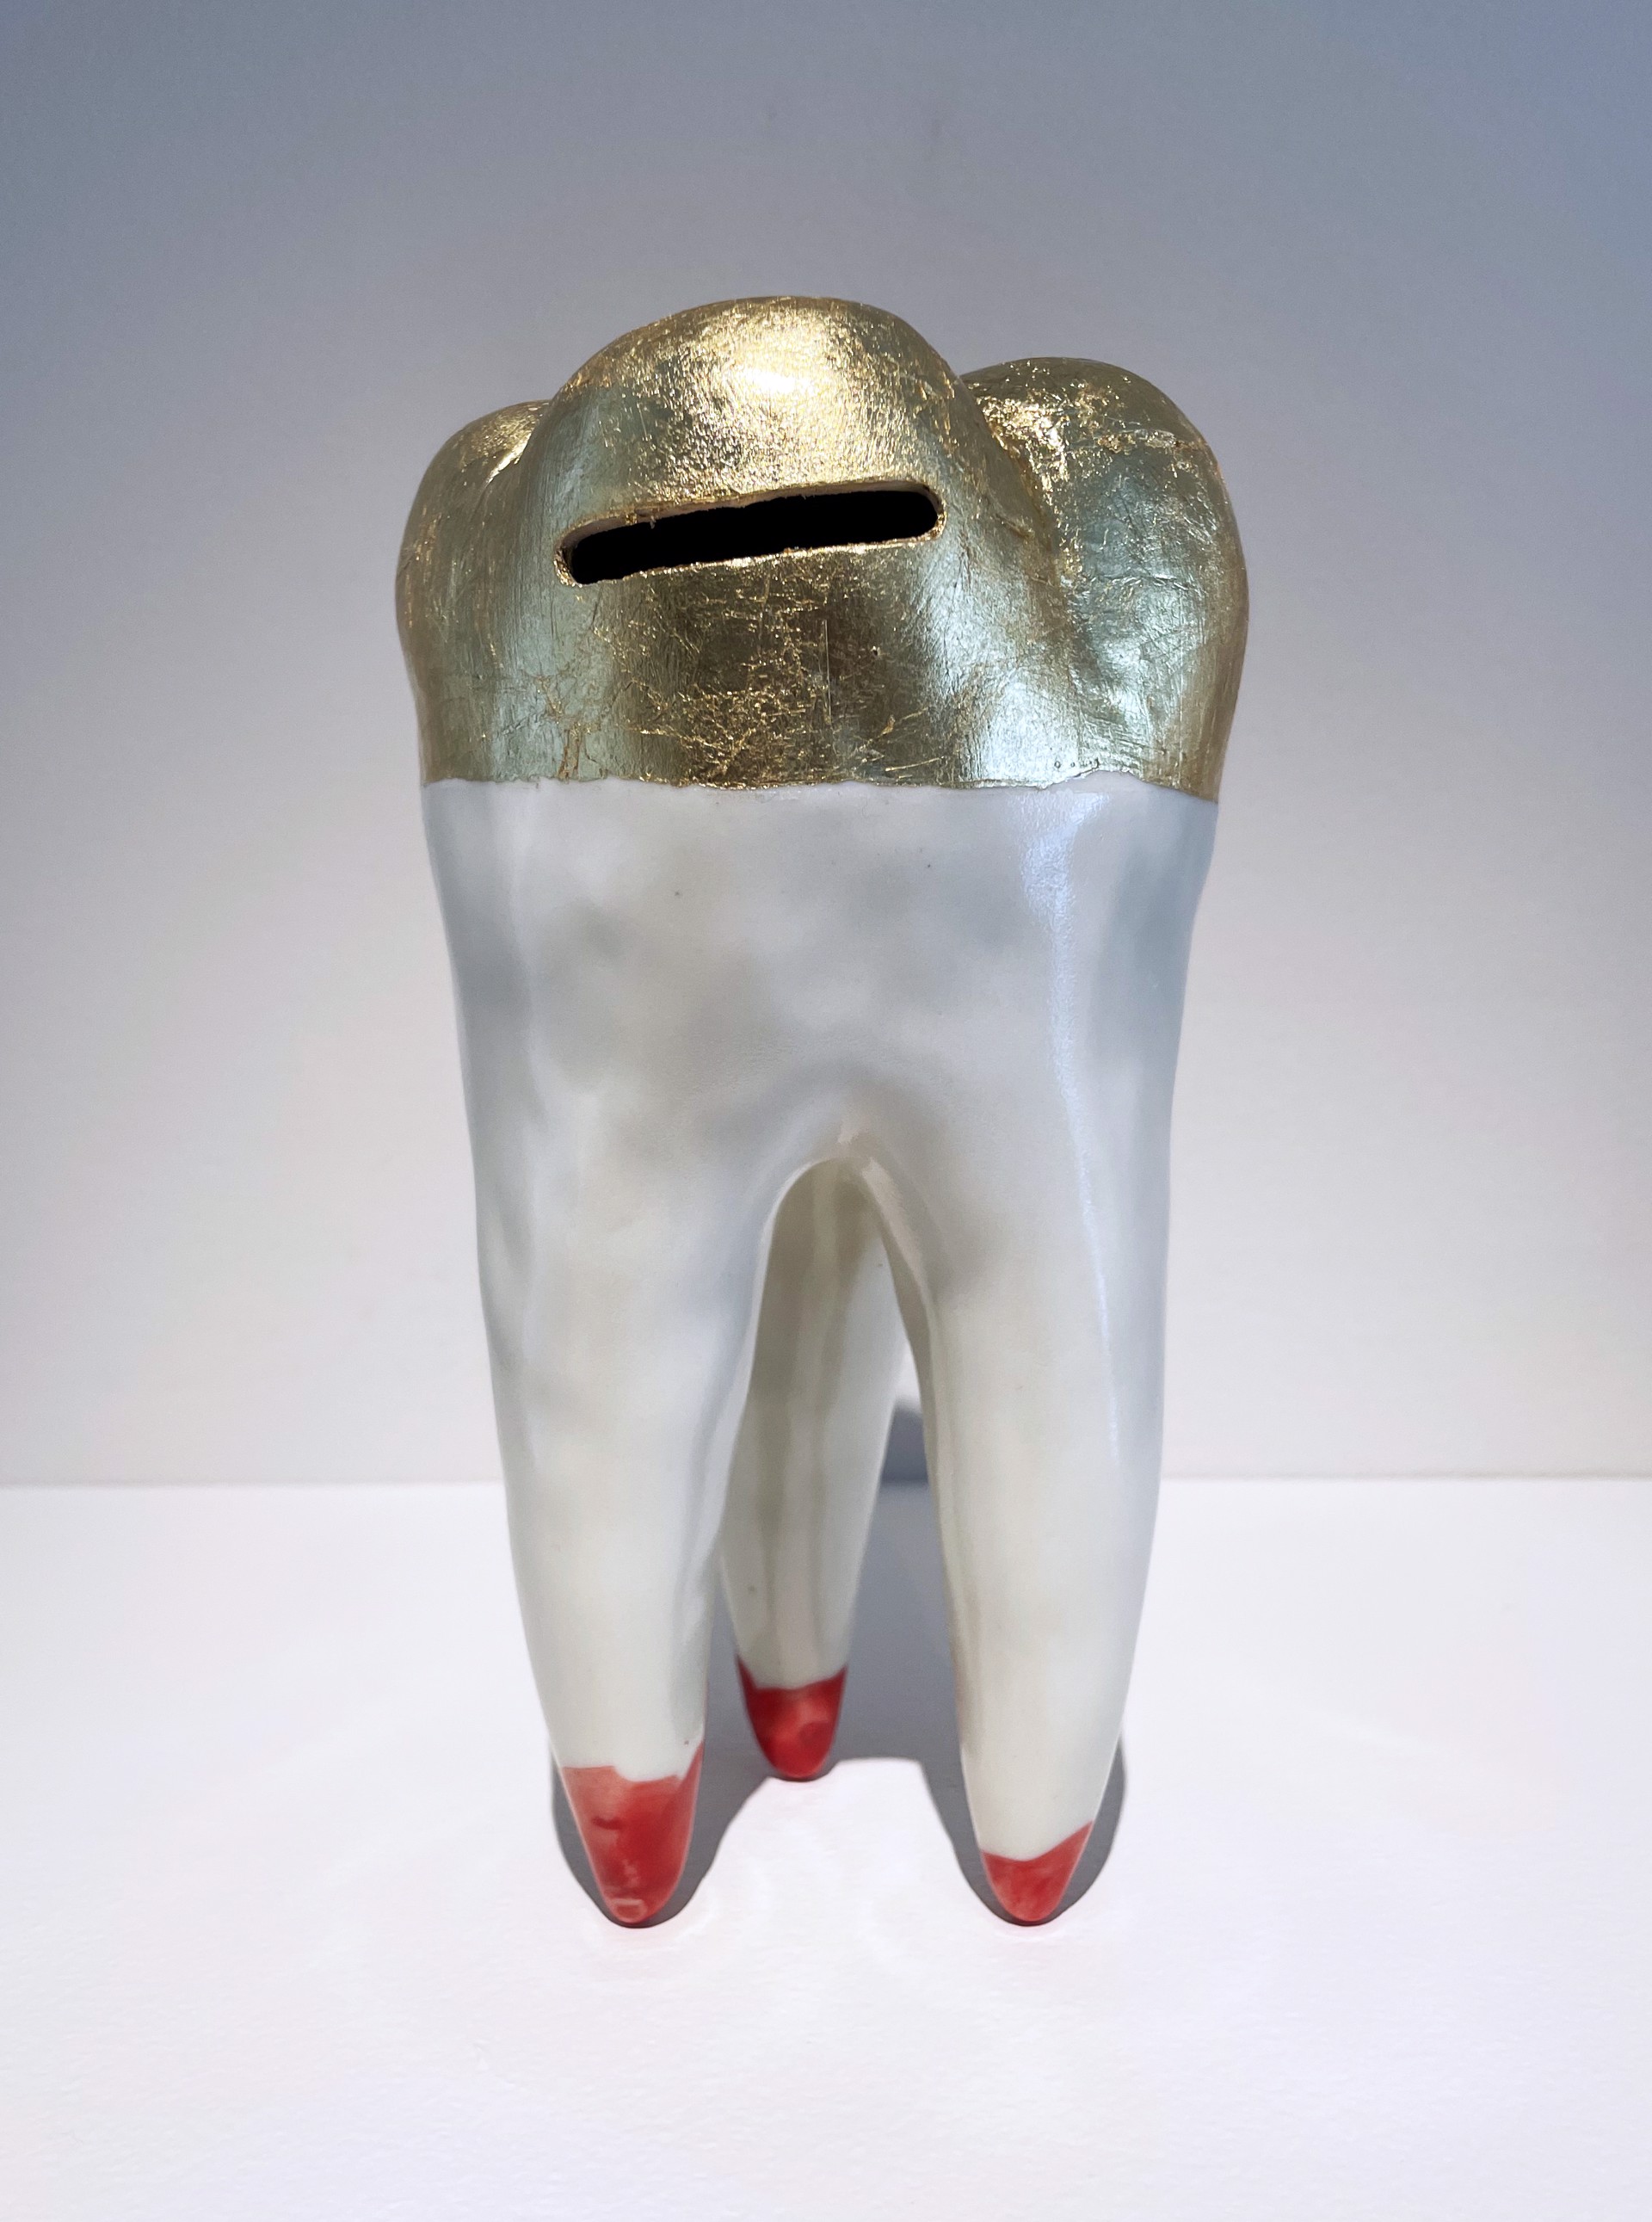 Your Gold Tooth by Michael Corney